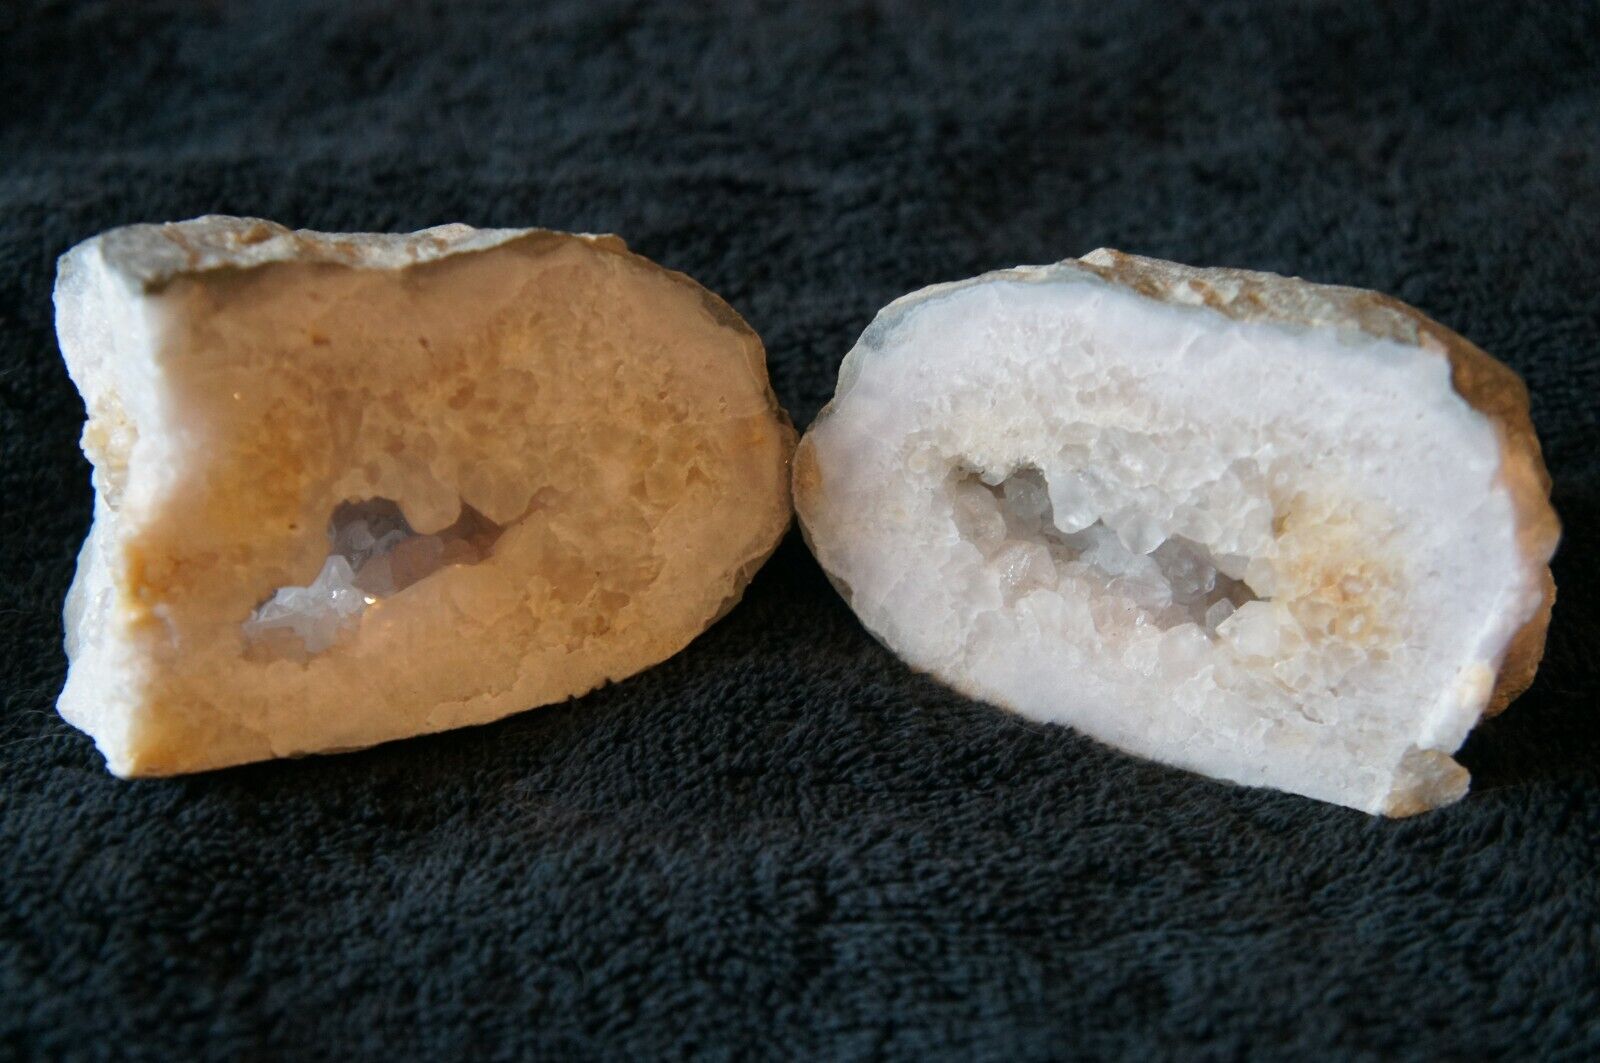 Kentucky Geode (Lincoln County) cut open and cleaned